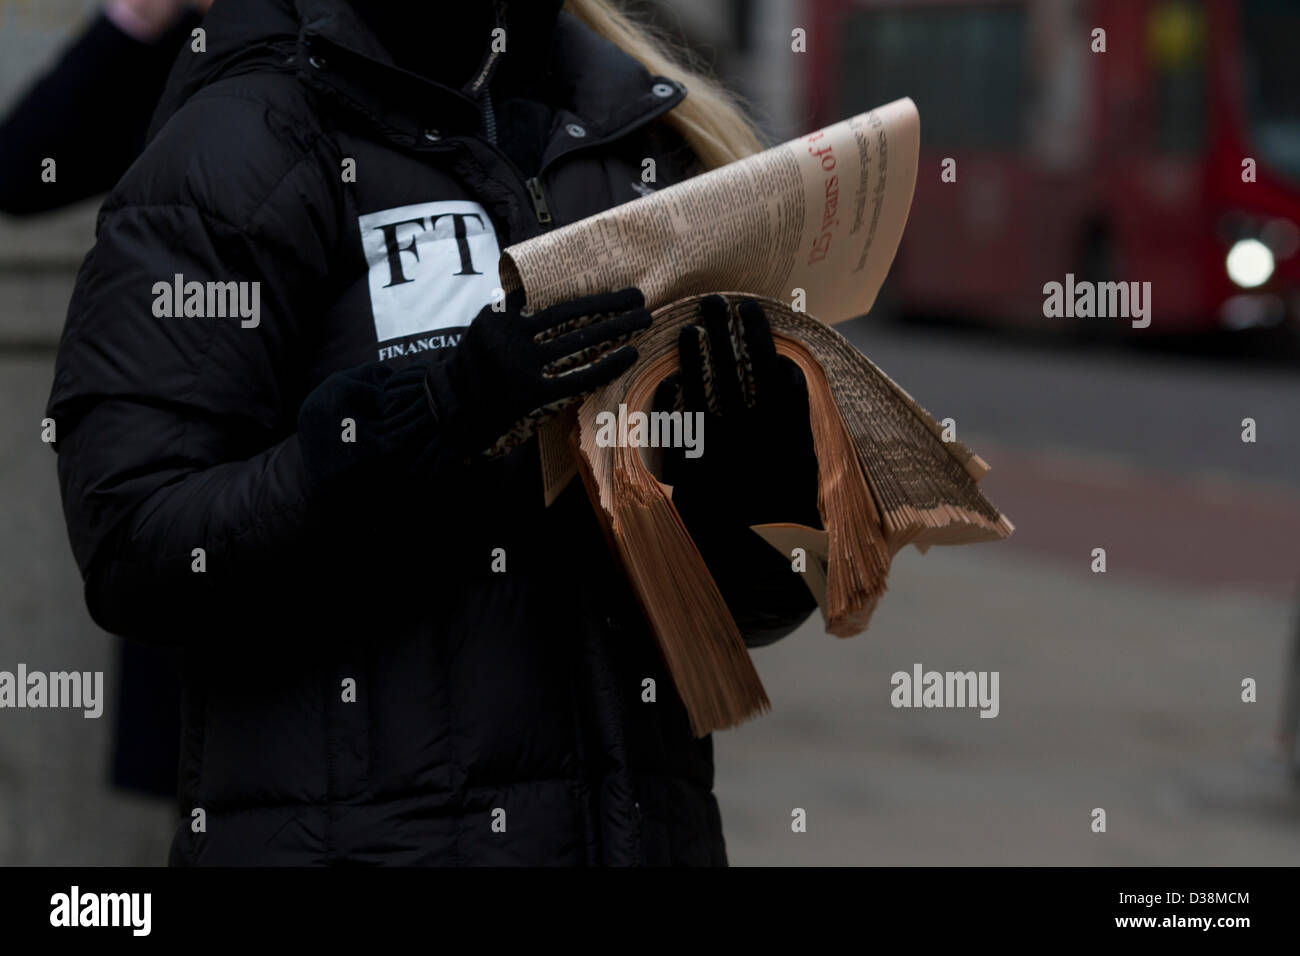 London, UK. 13th February 2013. A Newspaper vendor distributes free copies of the first Financial Times in the city of London financial district. The Financial Times was first published on 13 February 1888 and celebrates its 125th anniversary with a special edition. Amer Ghazzal / Alamy Live News Stock Photo